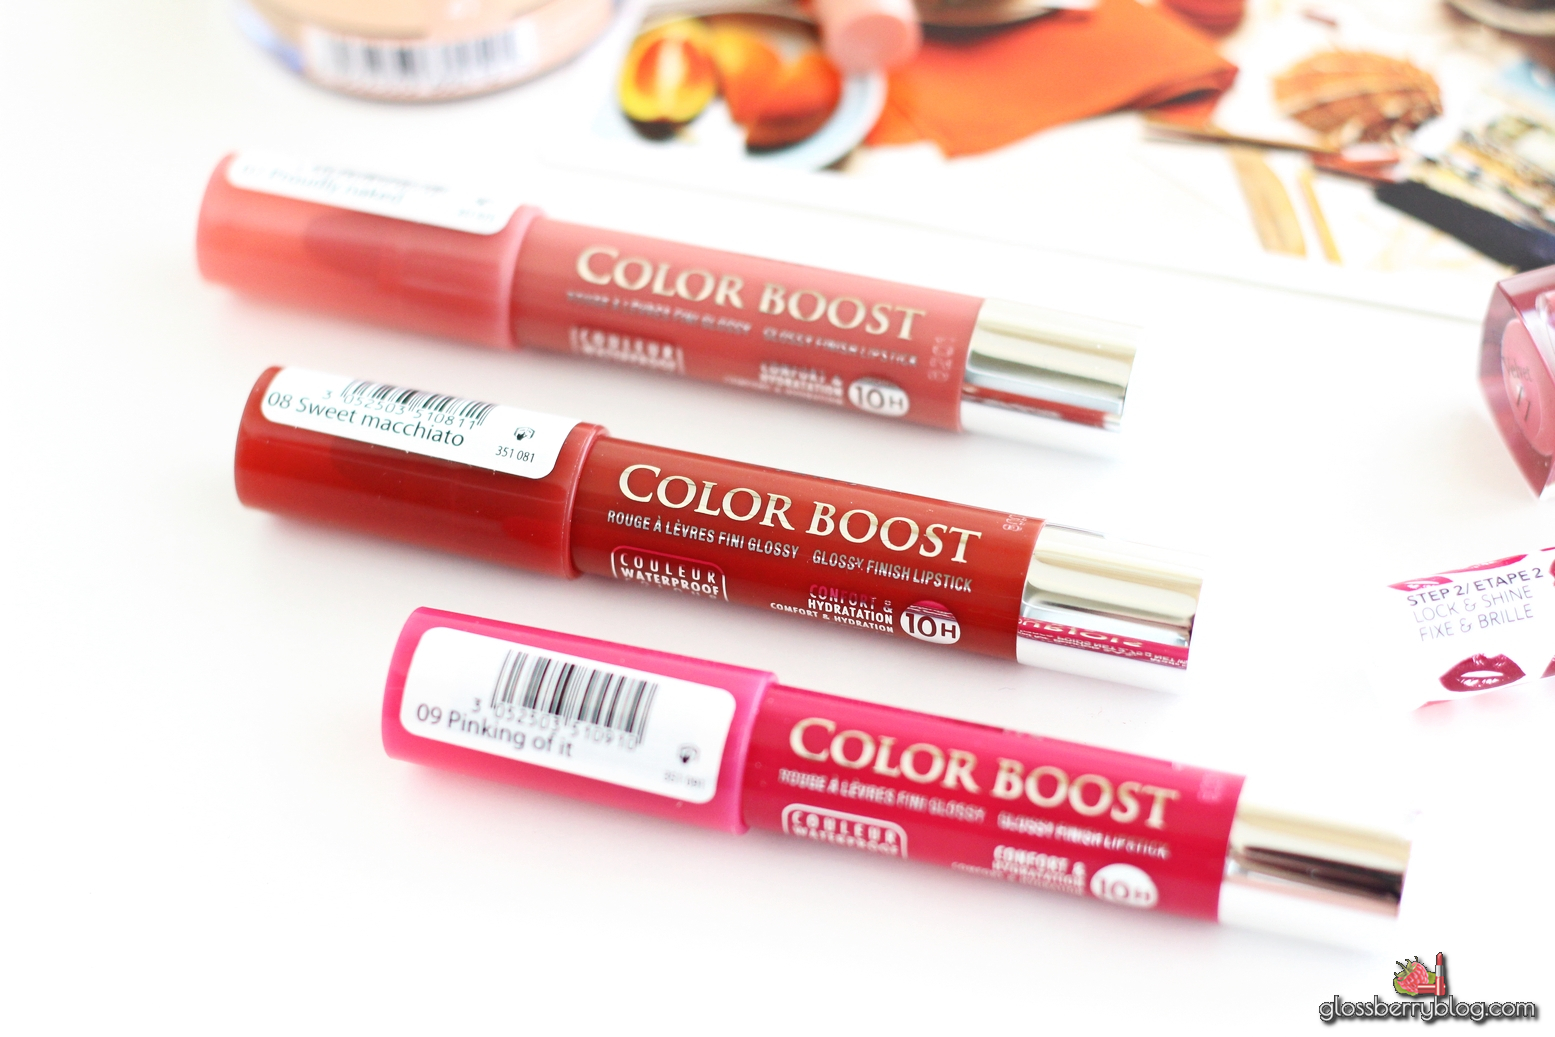 Bourjois Colour Boost Lip Crayon  - Proudly Naked, Sweet Machiato, Pinking Of It 09 08 07 review swatches comparison fuchsia libre new colors stain glossy chubby swatch recommendation המלצה צ'אבי בורז'ואה בורג'ואה שפתון בלוג איפור וטיפוח Glossberry blog גלוסברי 